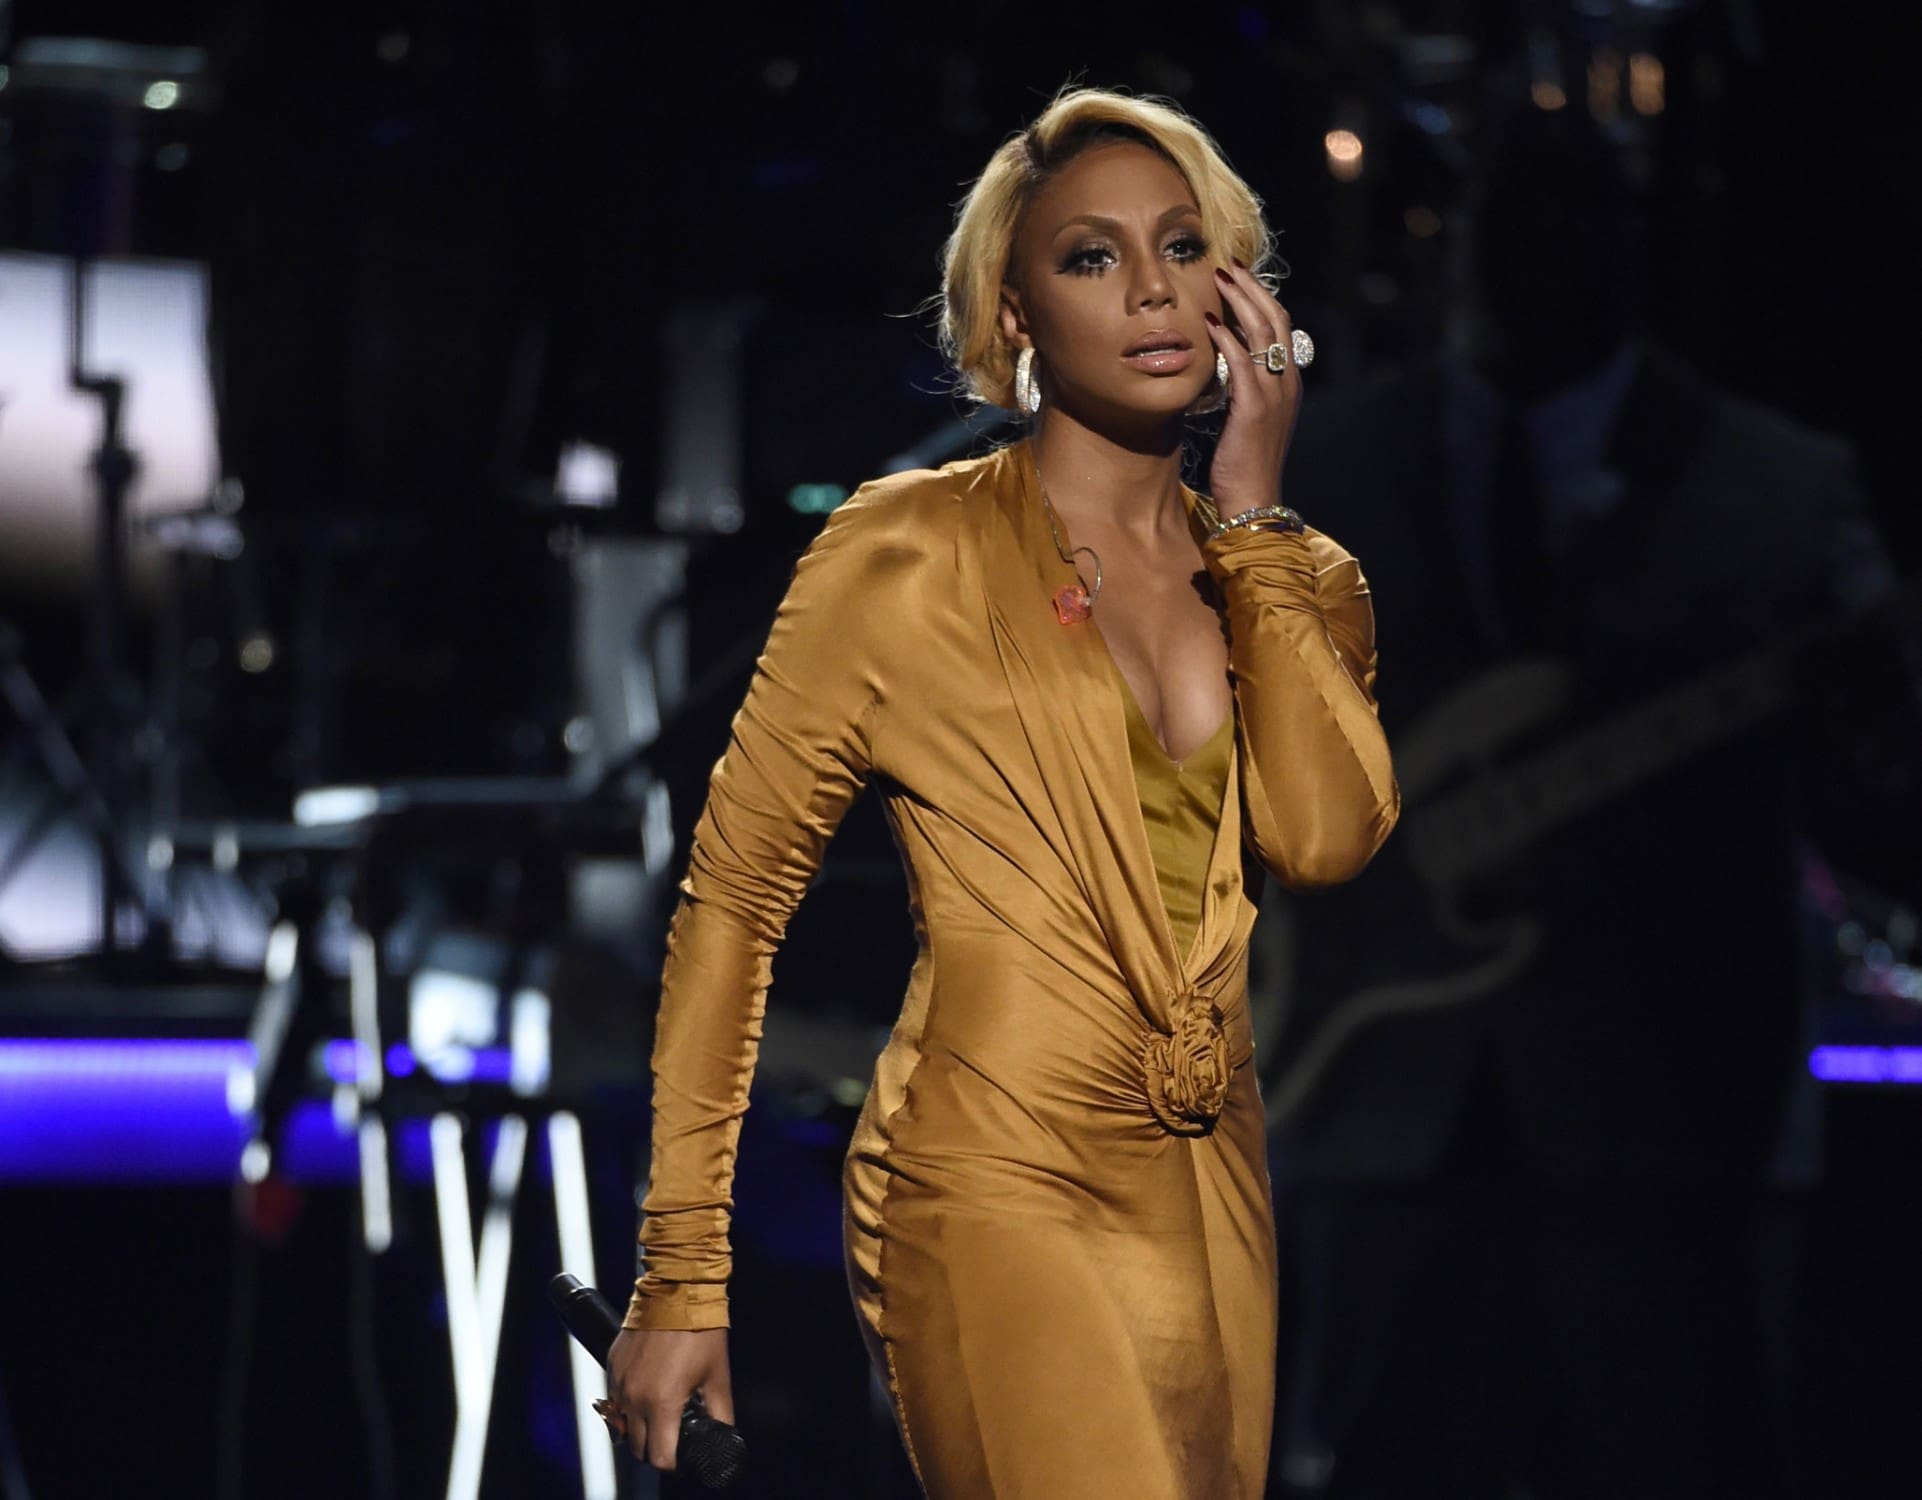 Tamar Braxton Is Coming Home To Meet Her Fans